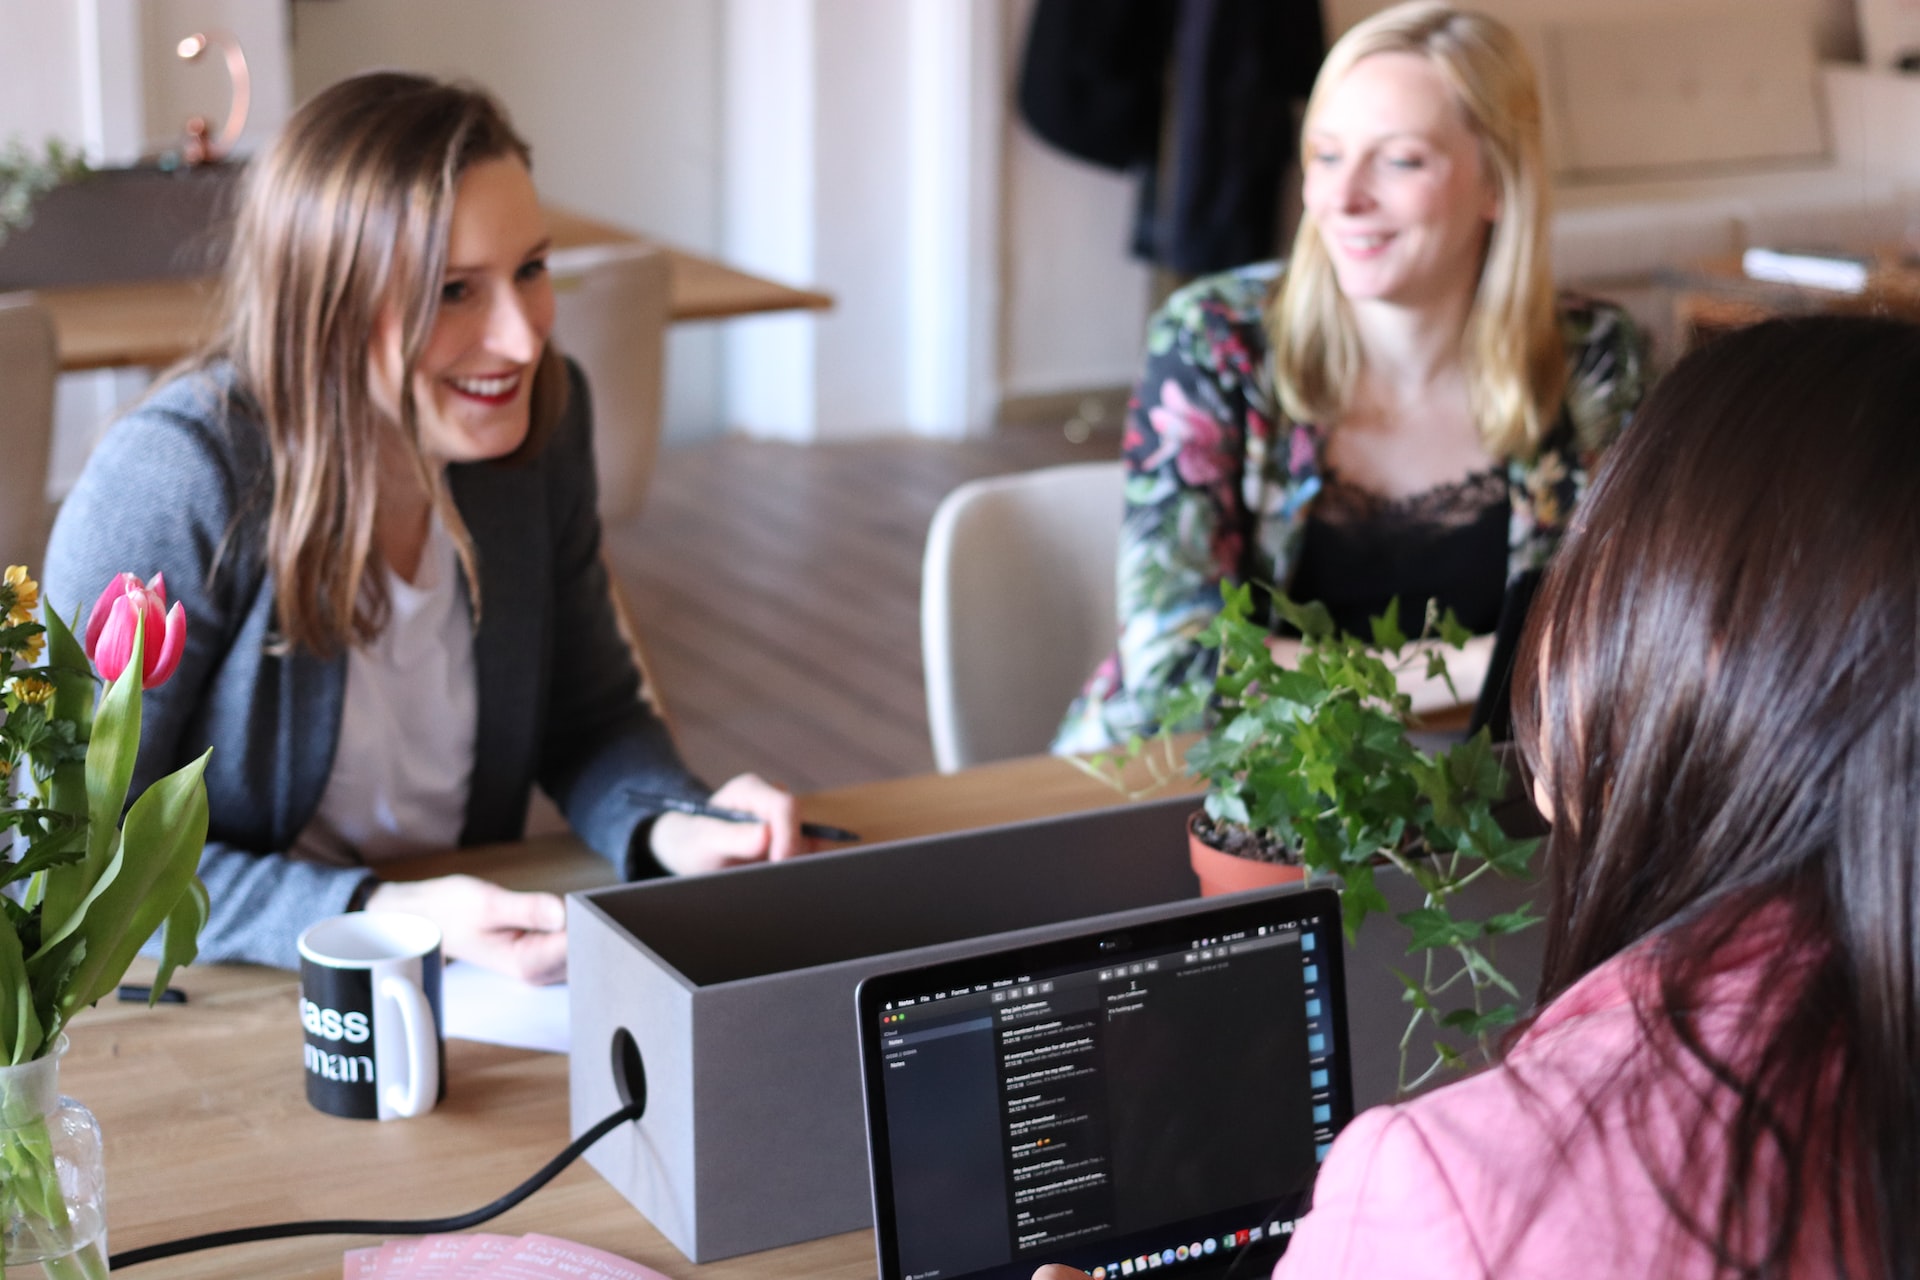 Group of female technology workers smiling while collaborating seated at a table.